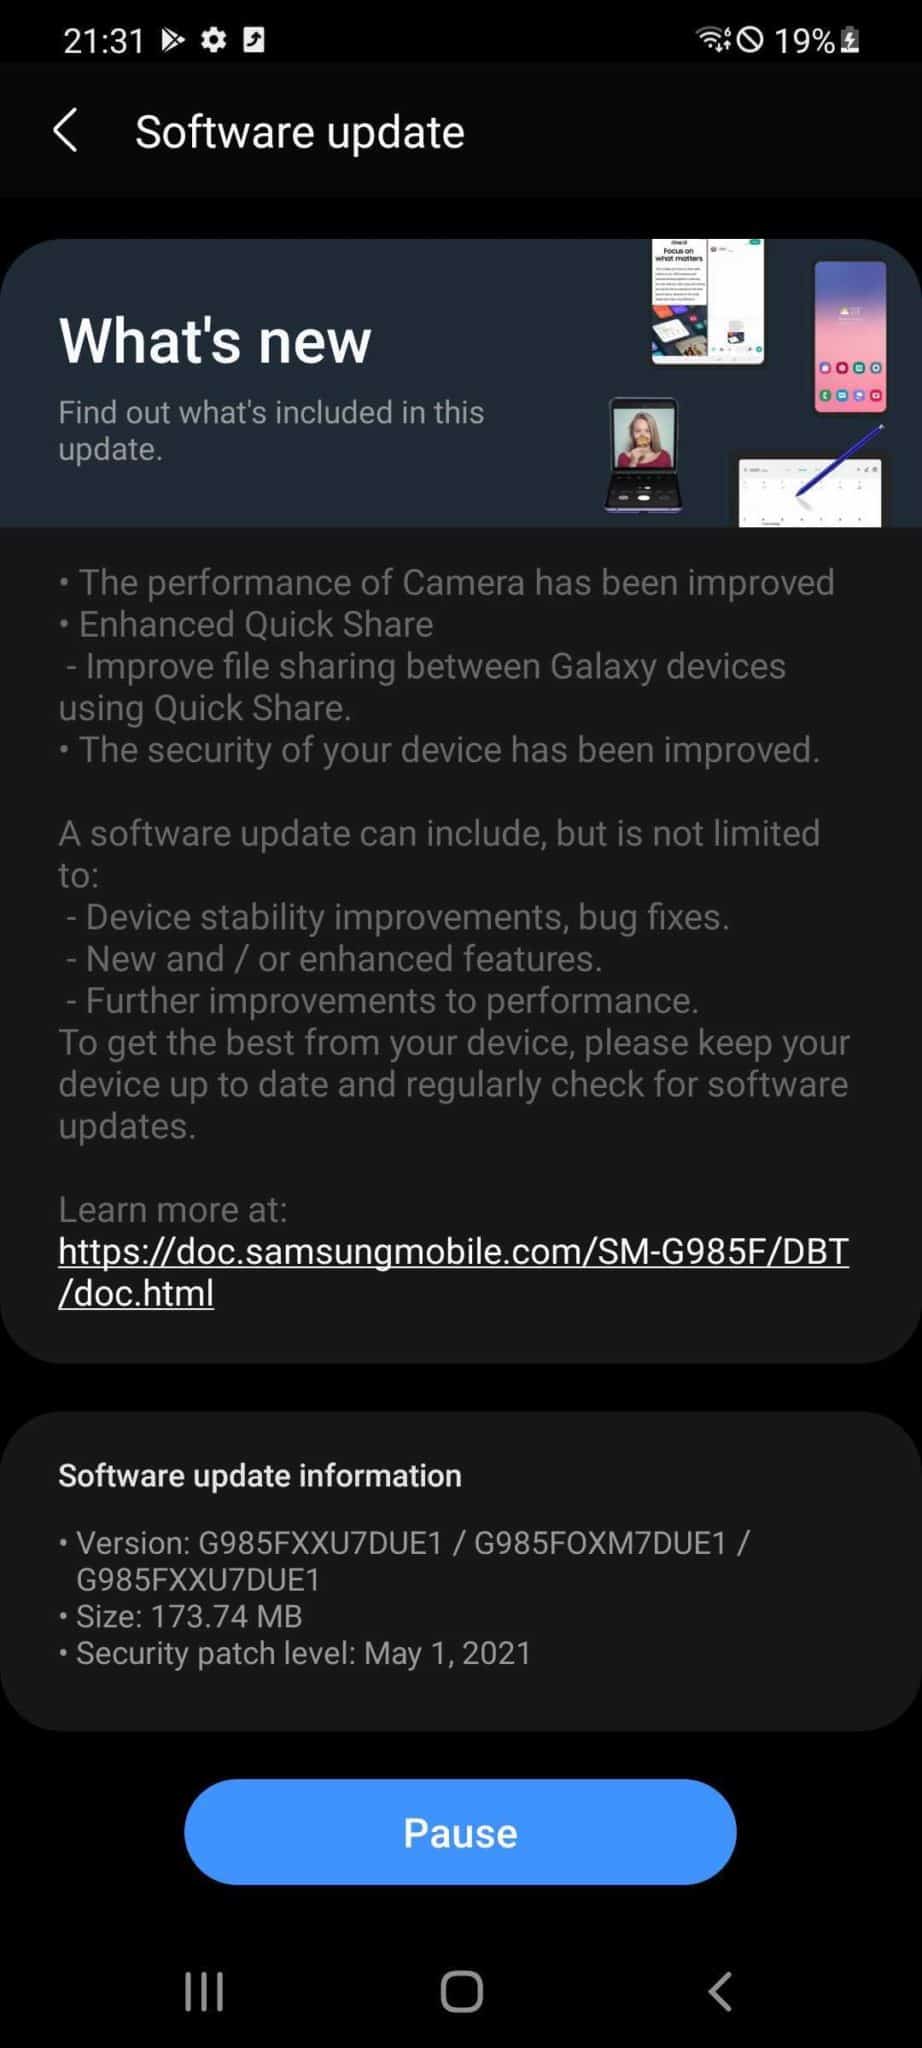 Samsung Galaxy S20 and Galaxy S21 series May 2021 update